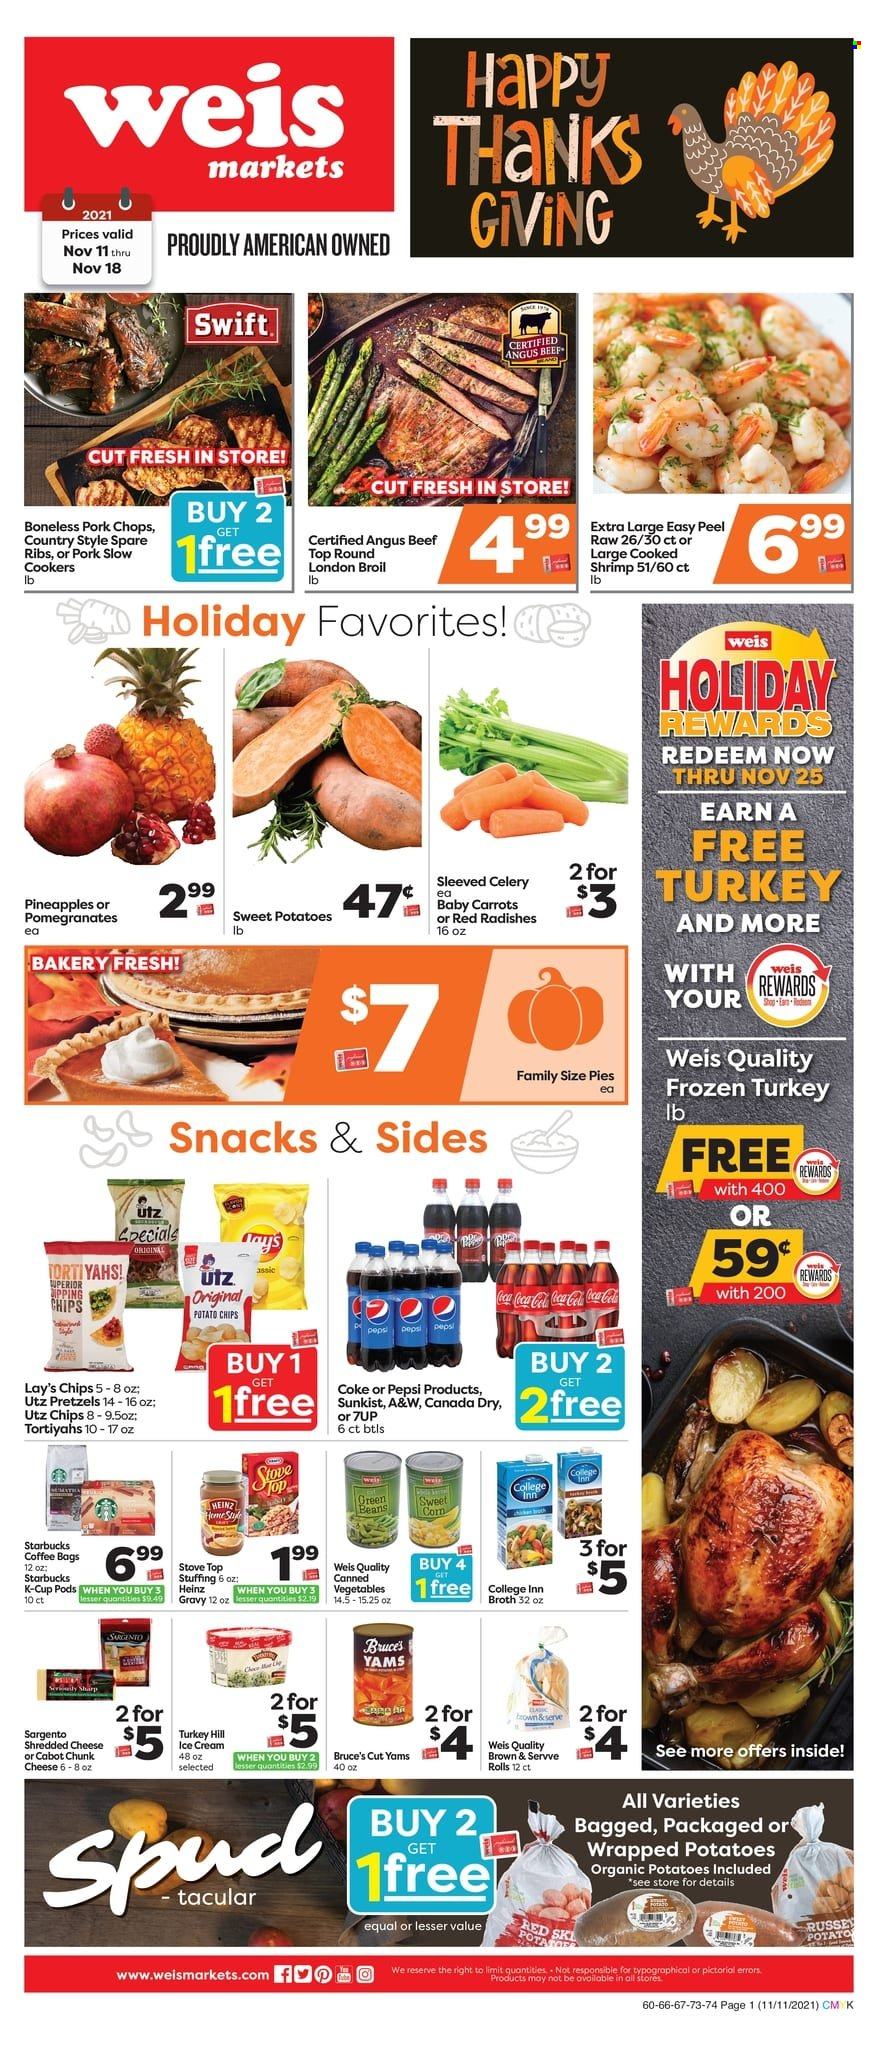 thumbnail - Weis Flyer - 11/11/2021 - 11/18/2021 - Sales products - pretzels, carrots, celery, radishes, sweet potato, sleeved celery, pineapple, whole turkey, beef meat, pork chops, pork meat, pork spare ribs, shrimps, shredded cheese, chunk cheese, Sargento, ice cream, snack, potato chips, Lay’s, broth, Heinz, canned vegetables, Canada Dry, Coca-Cola, Pepsi, 7UP, A&W, coffee, Starbucks, coffee capsules, K-Cups, Sharp, stove, pomegranate. Page 1.